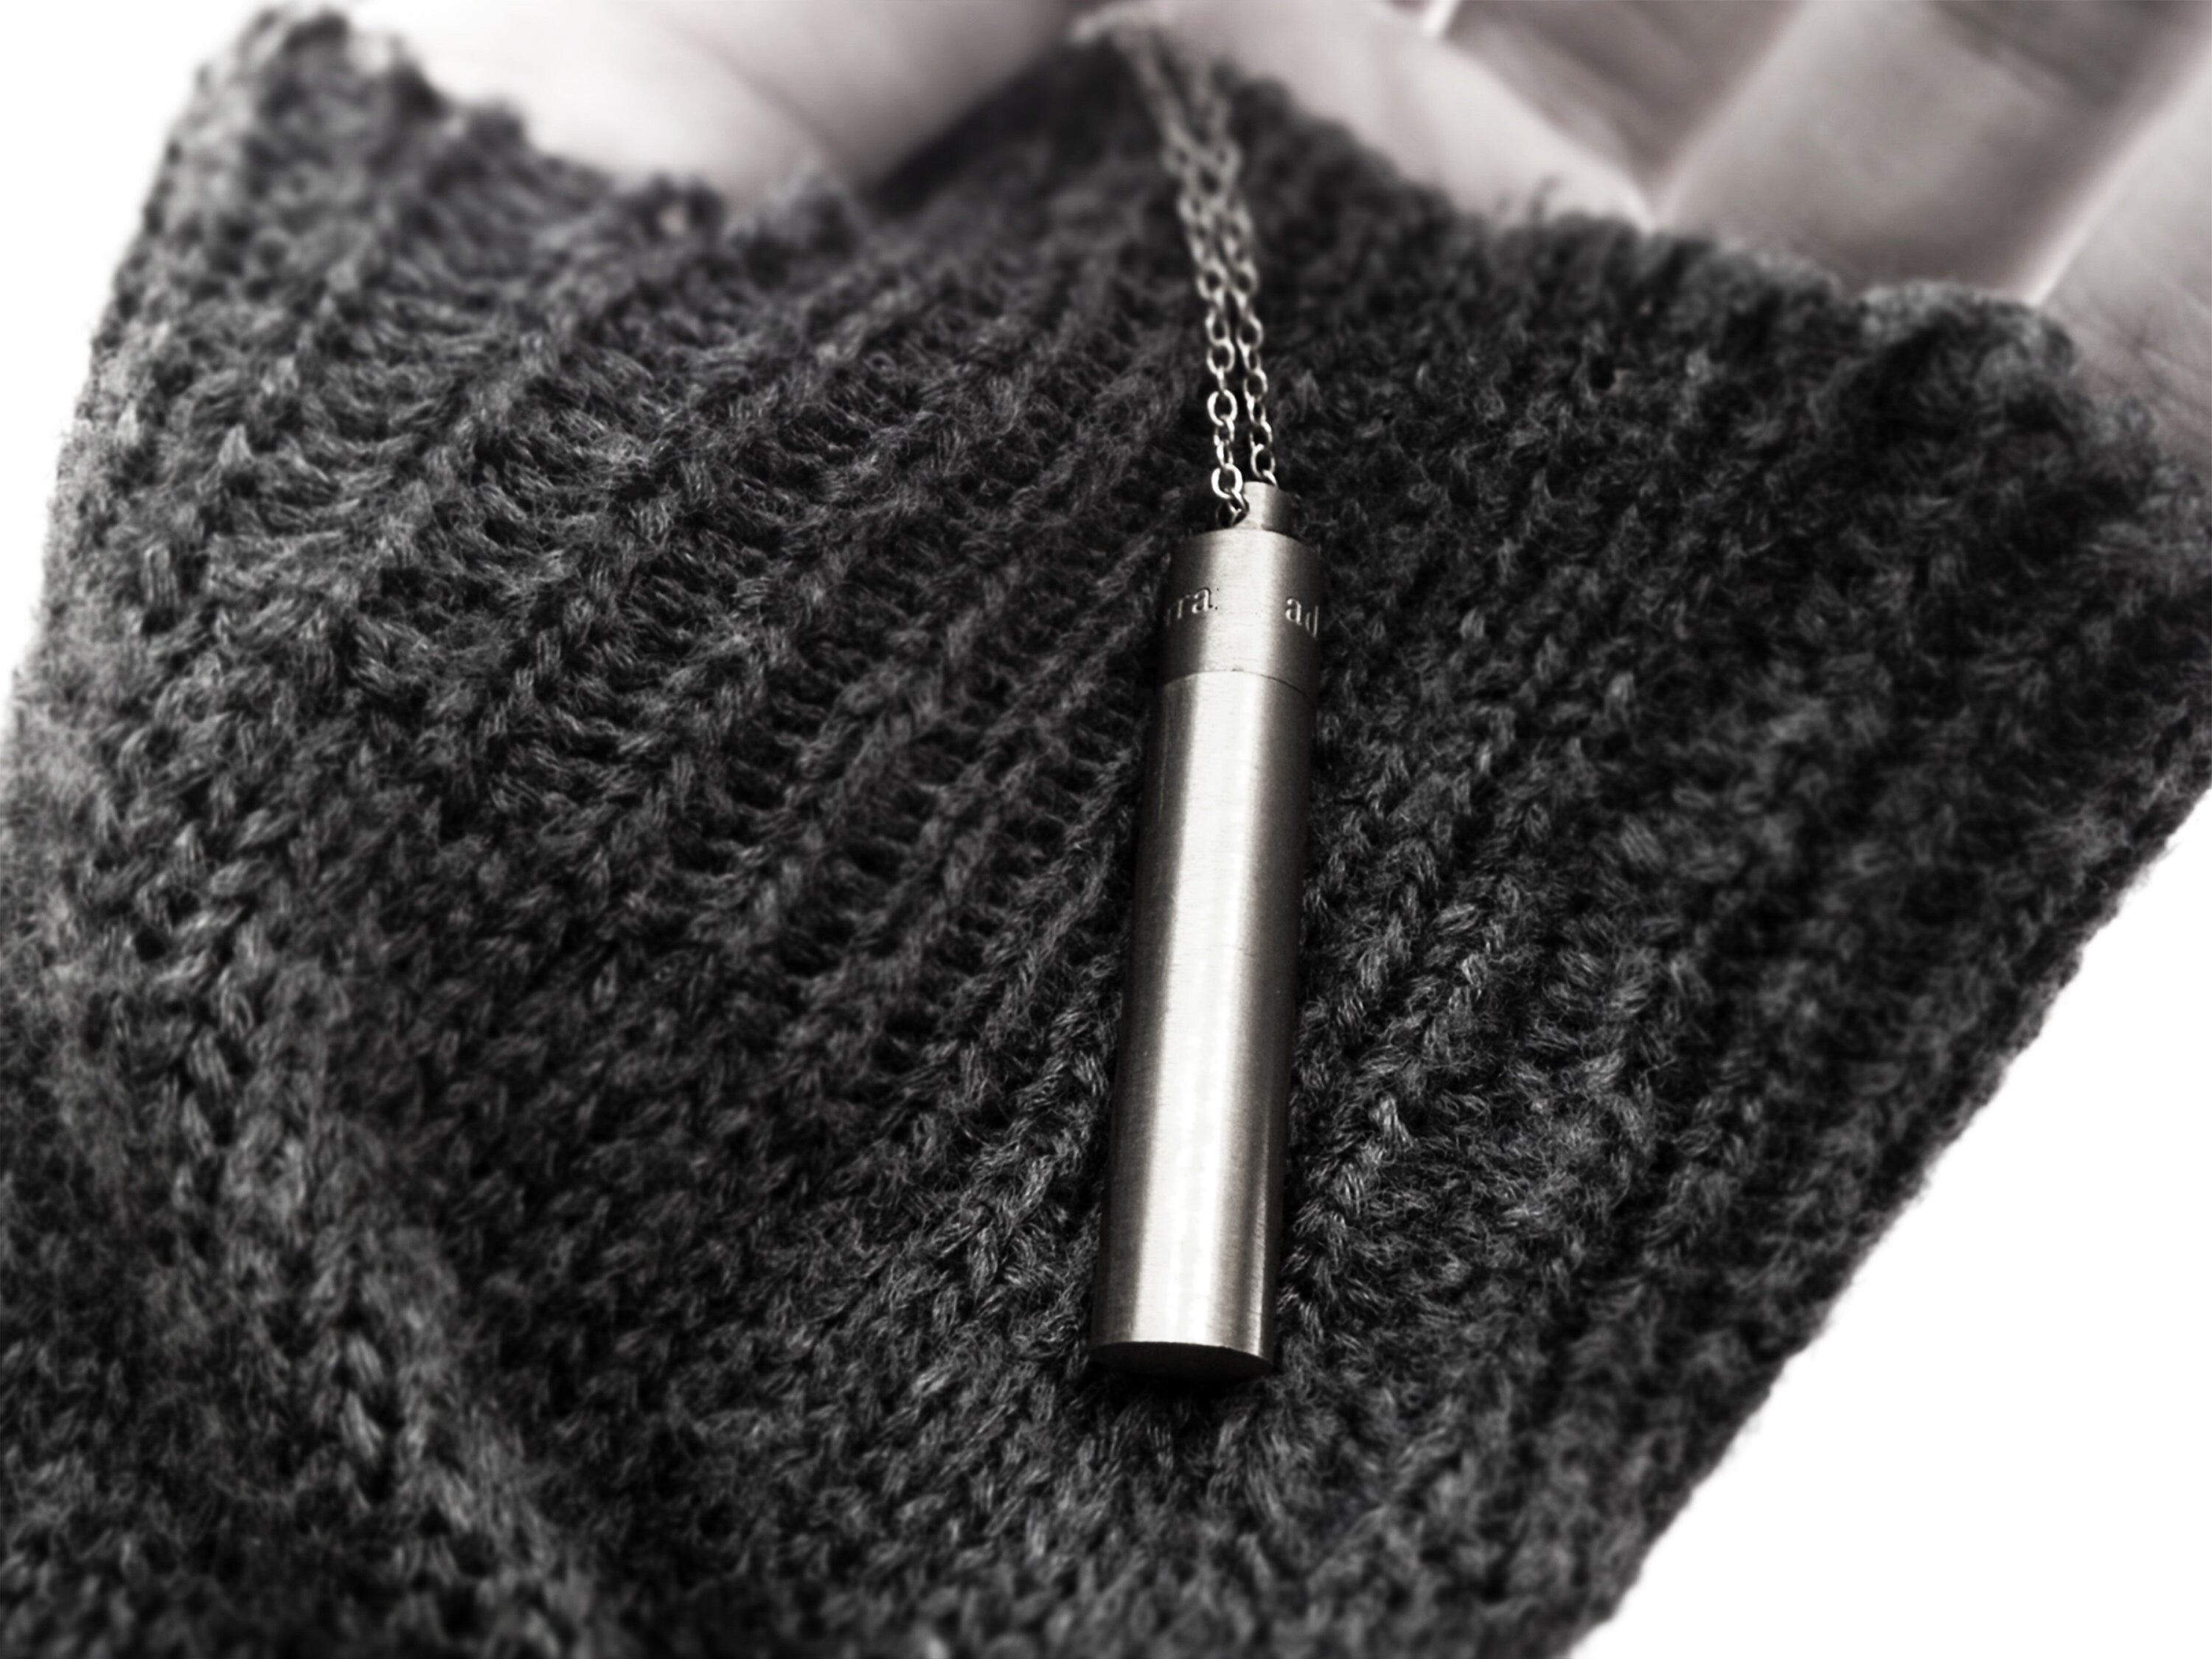 Time Capsule Necklace - Stainless Steel Minimalist Container Pendant with Glass Vial - EDC Locket Jewelry Gift